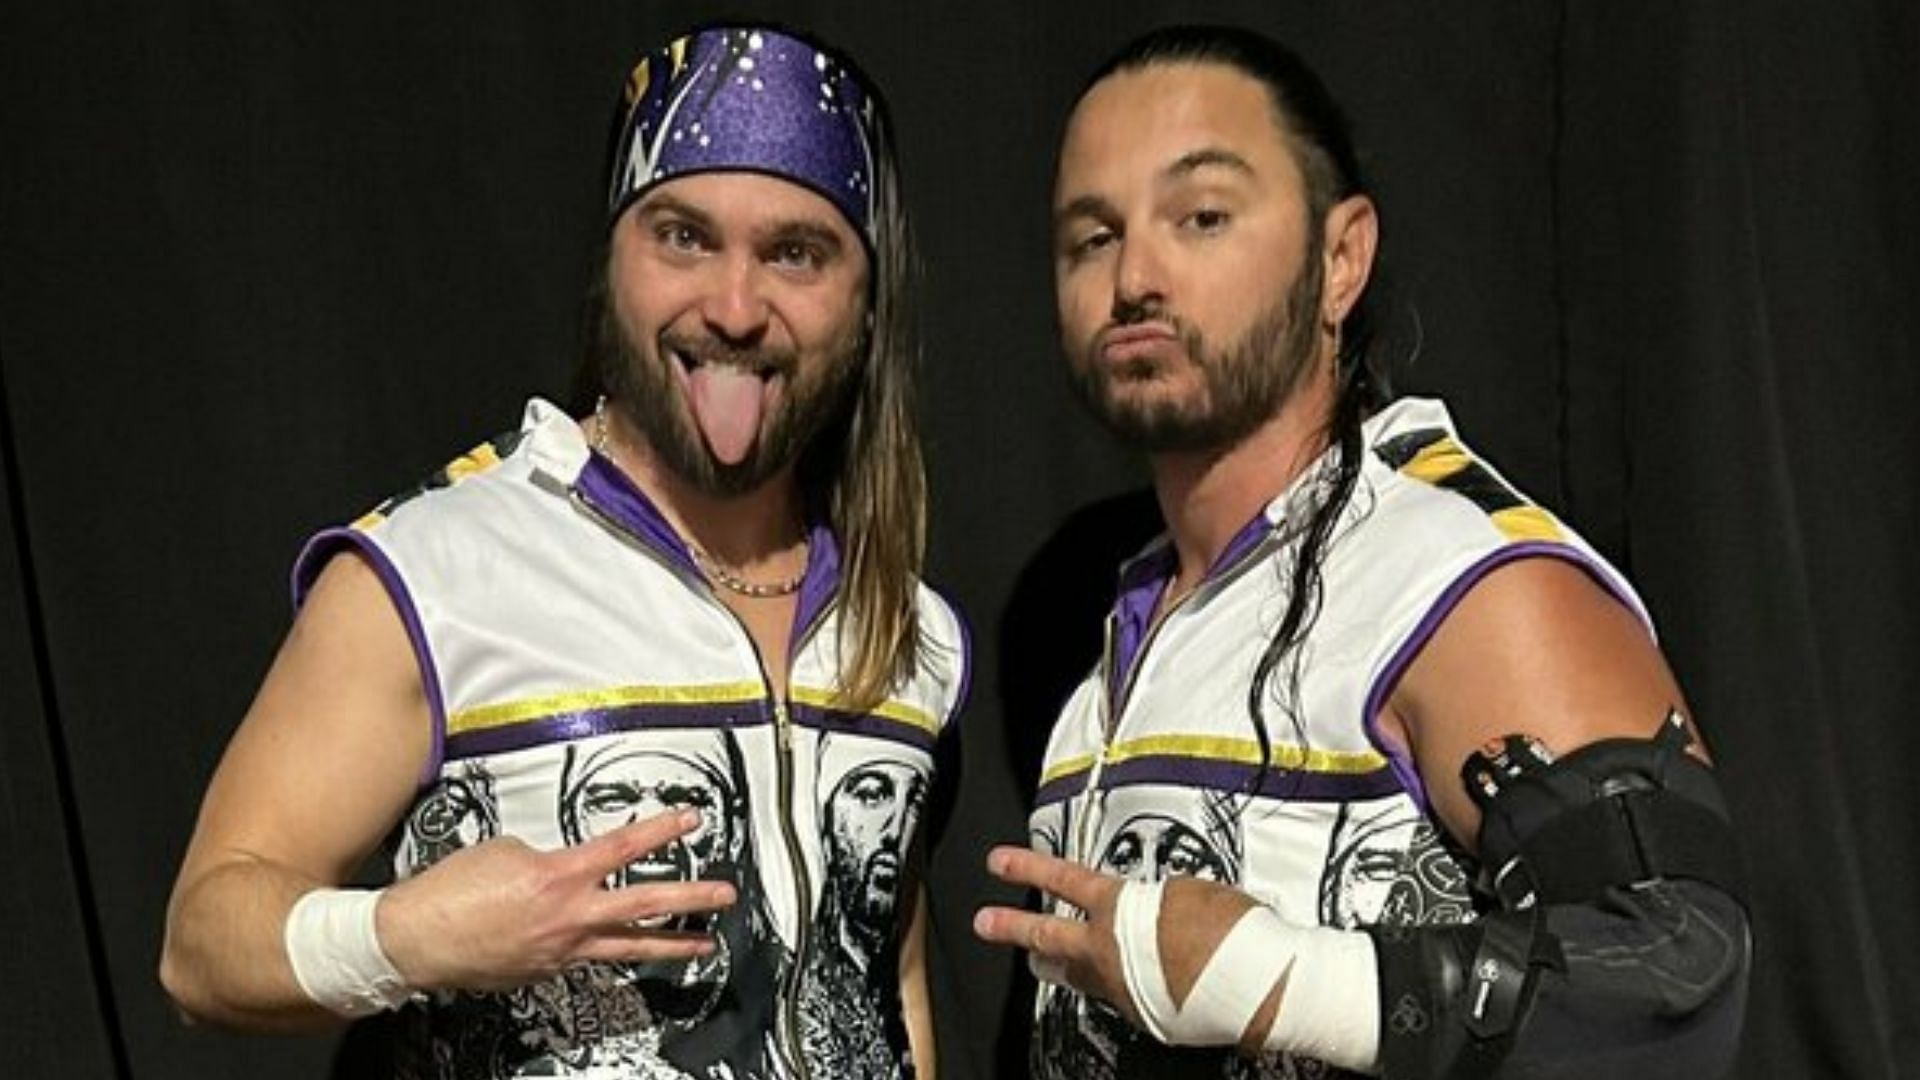 The Young bucks are multi time AEW World Tag Team Champion